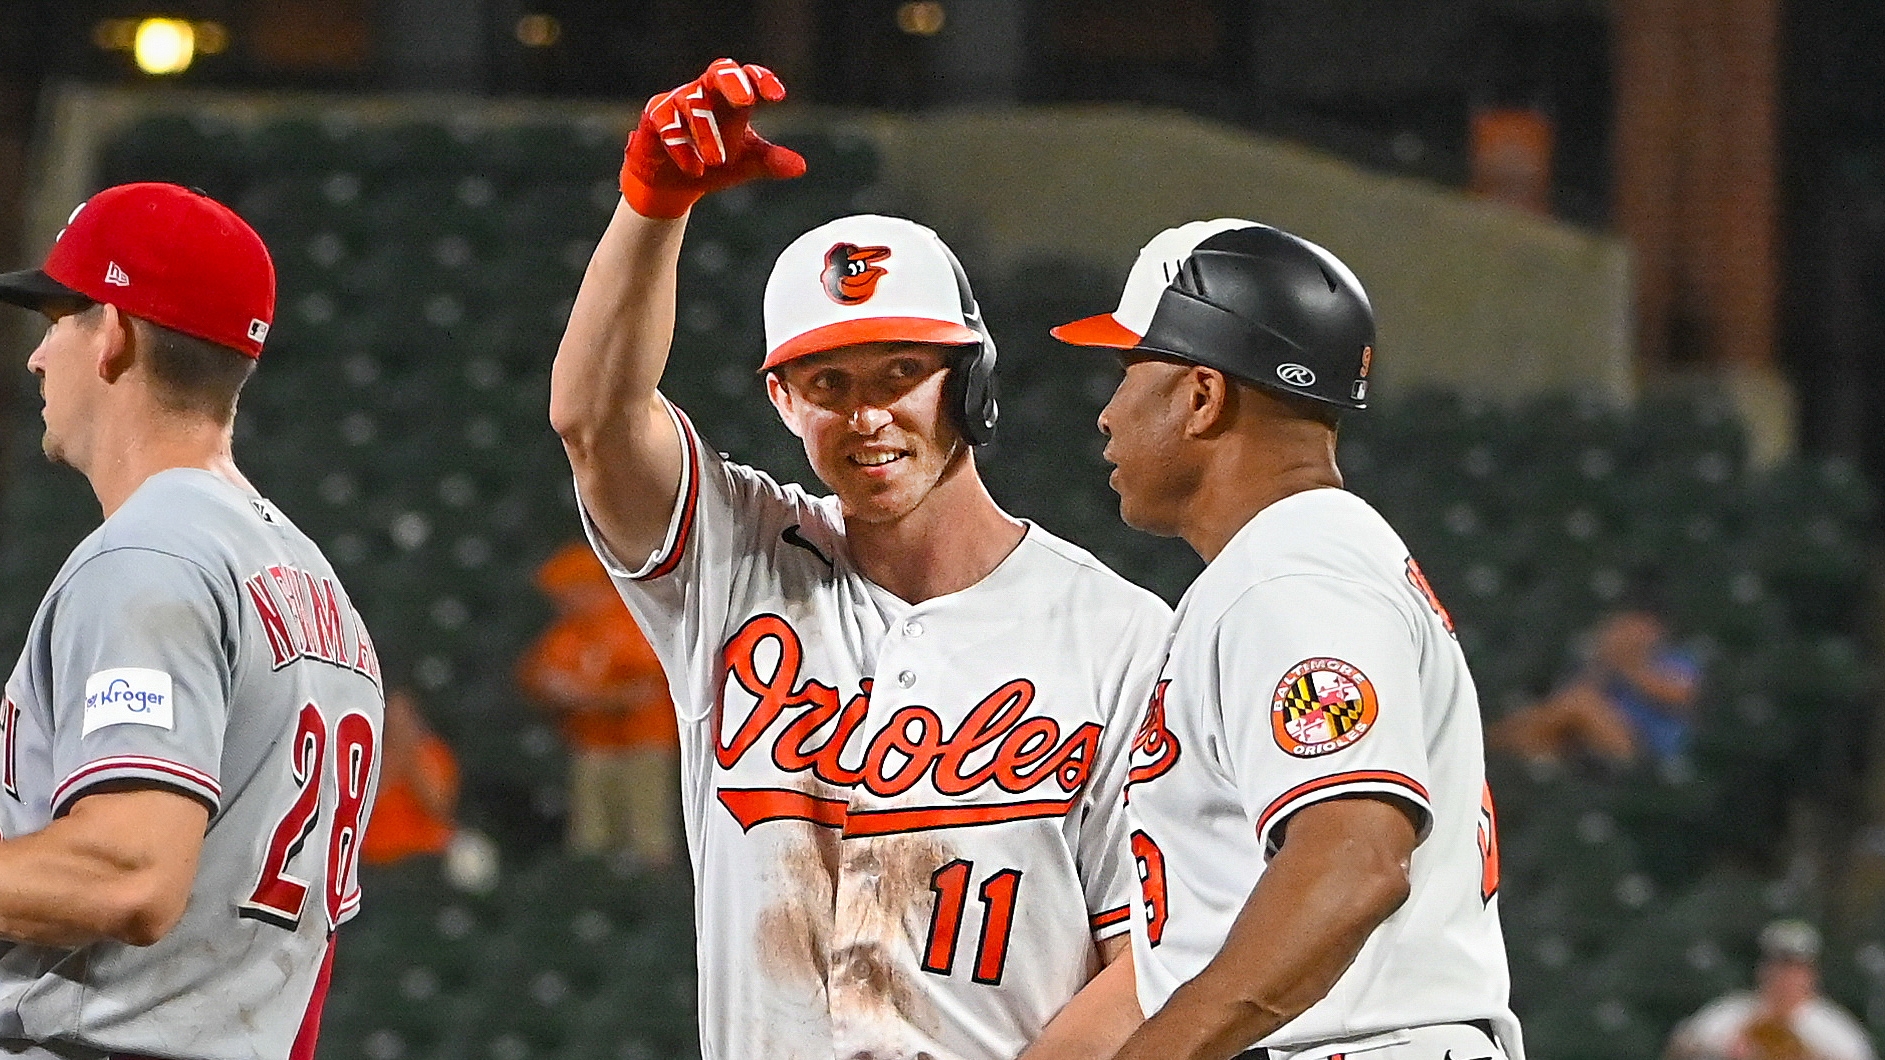 Jordan Westburg records first MLB hit in debut as Orioles top Reds, 10-3, in rain-delayed game It was really cool